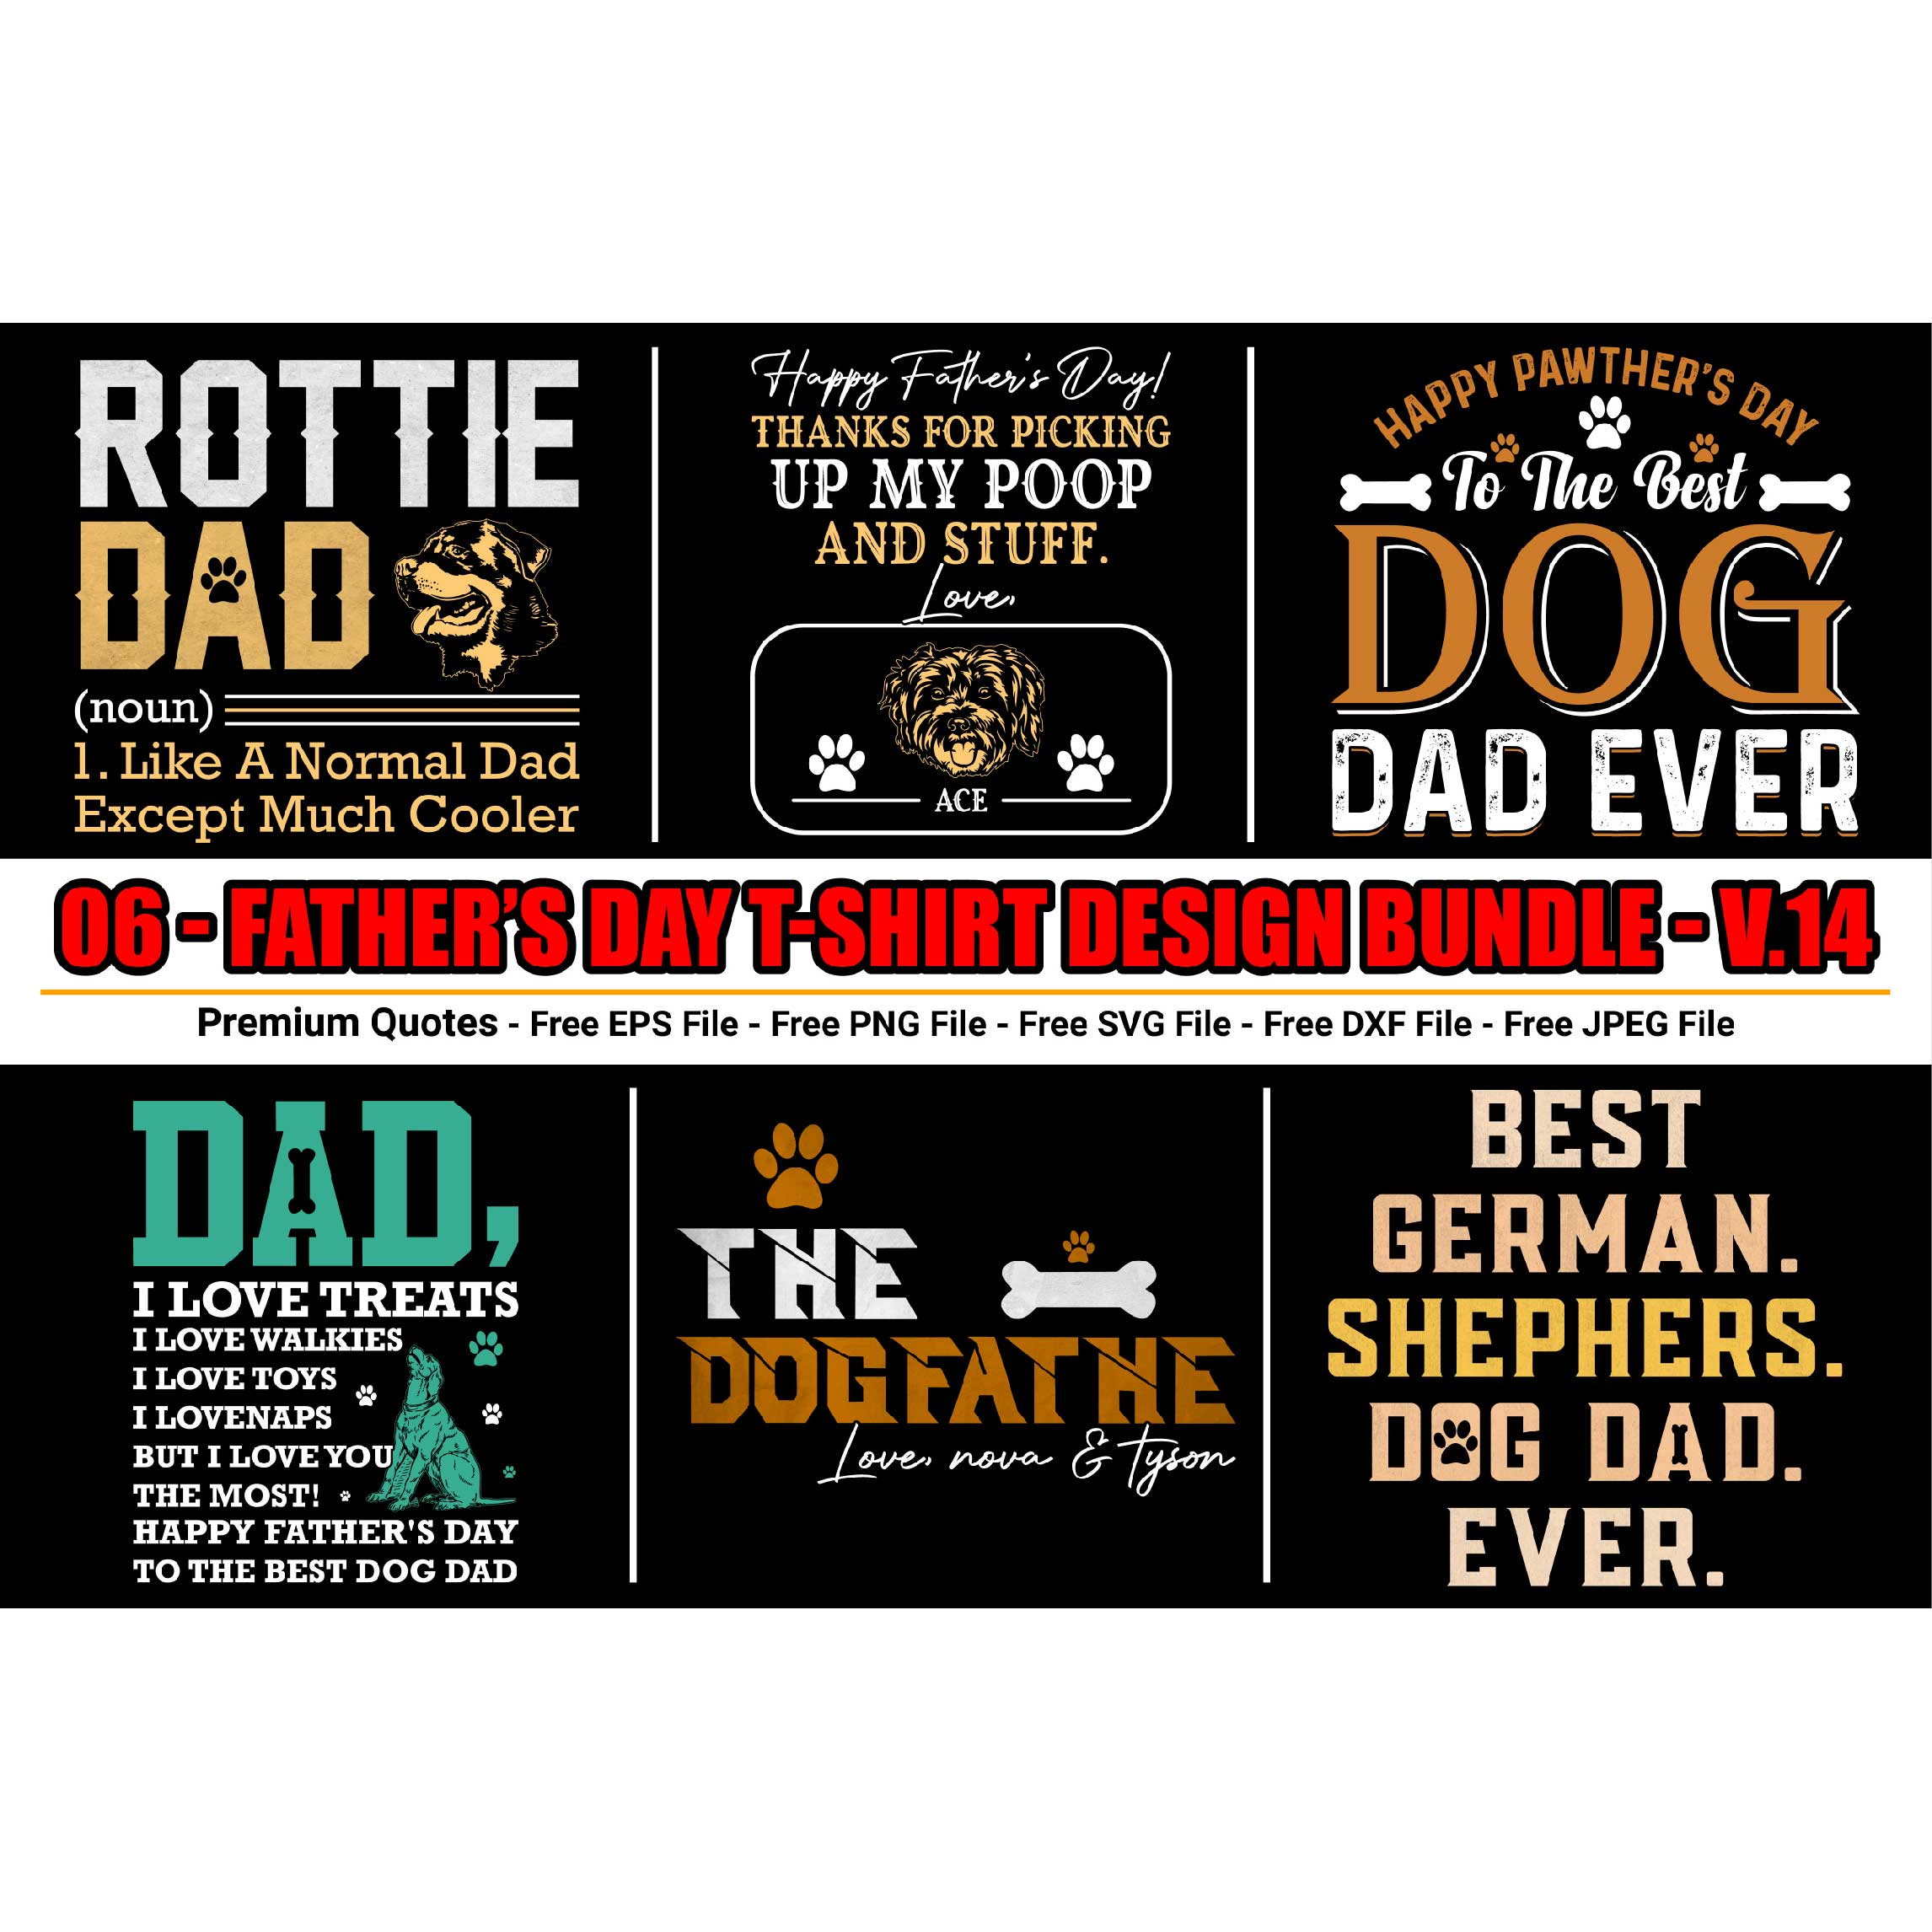 Dog Father's Day t-shirt design bundle preview image.